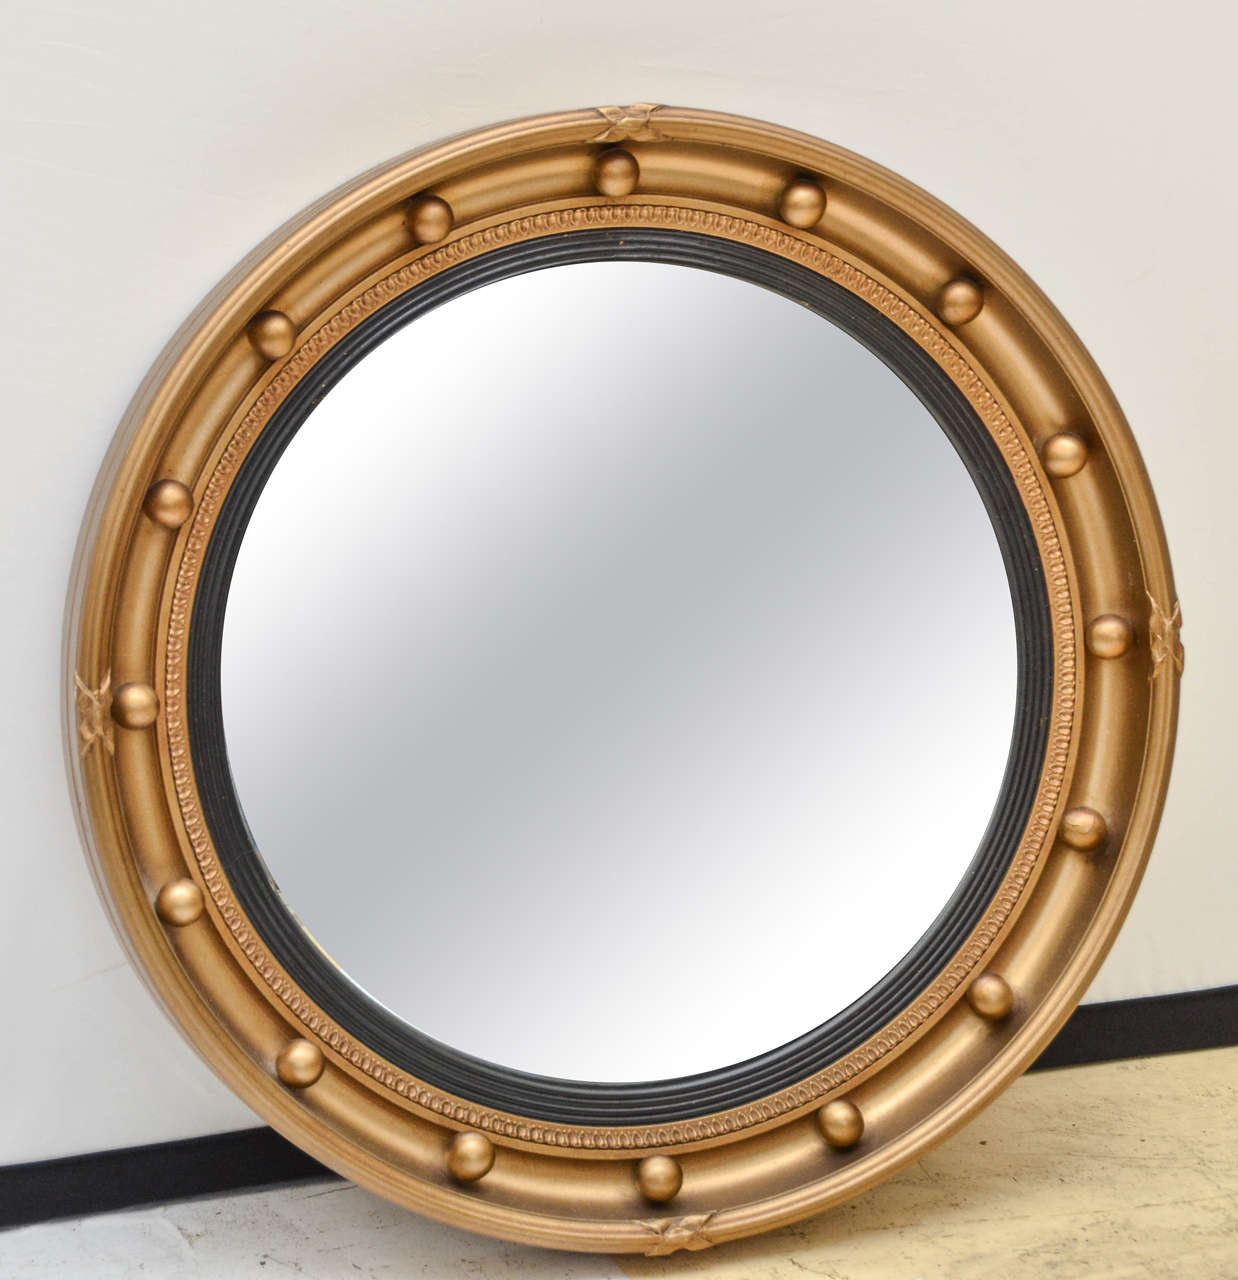 1920s English Regency style bulls eye mirror. The deep molded outer frame has 16 applied balls with a small leaf decorated border. The interior moulding reeded and ebonized. The rest of the frame has a gold toned finish. The back is labeled, Aisonea